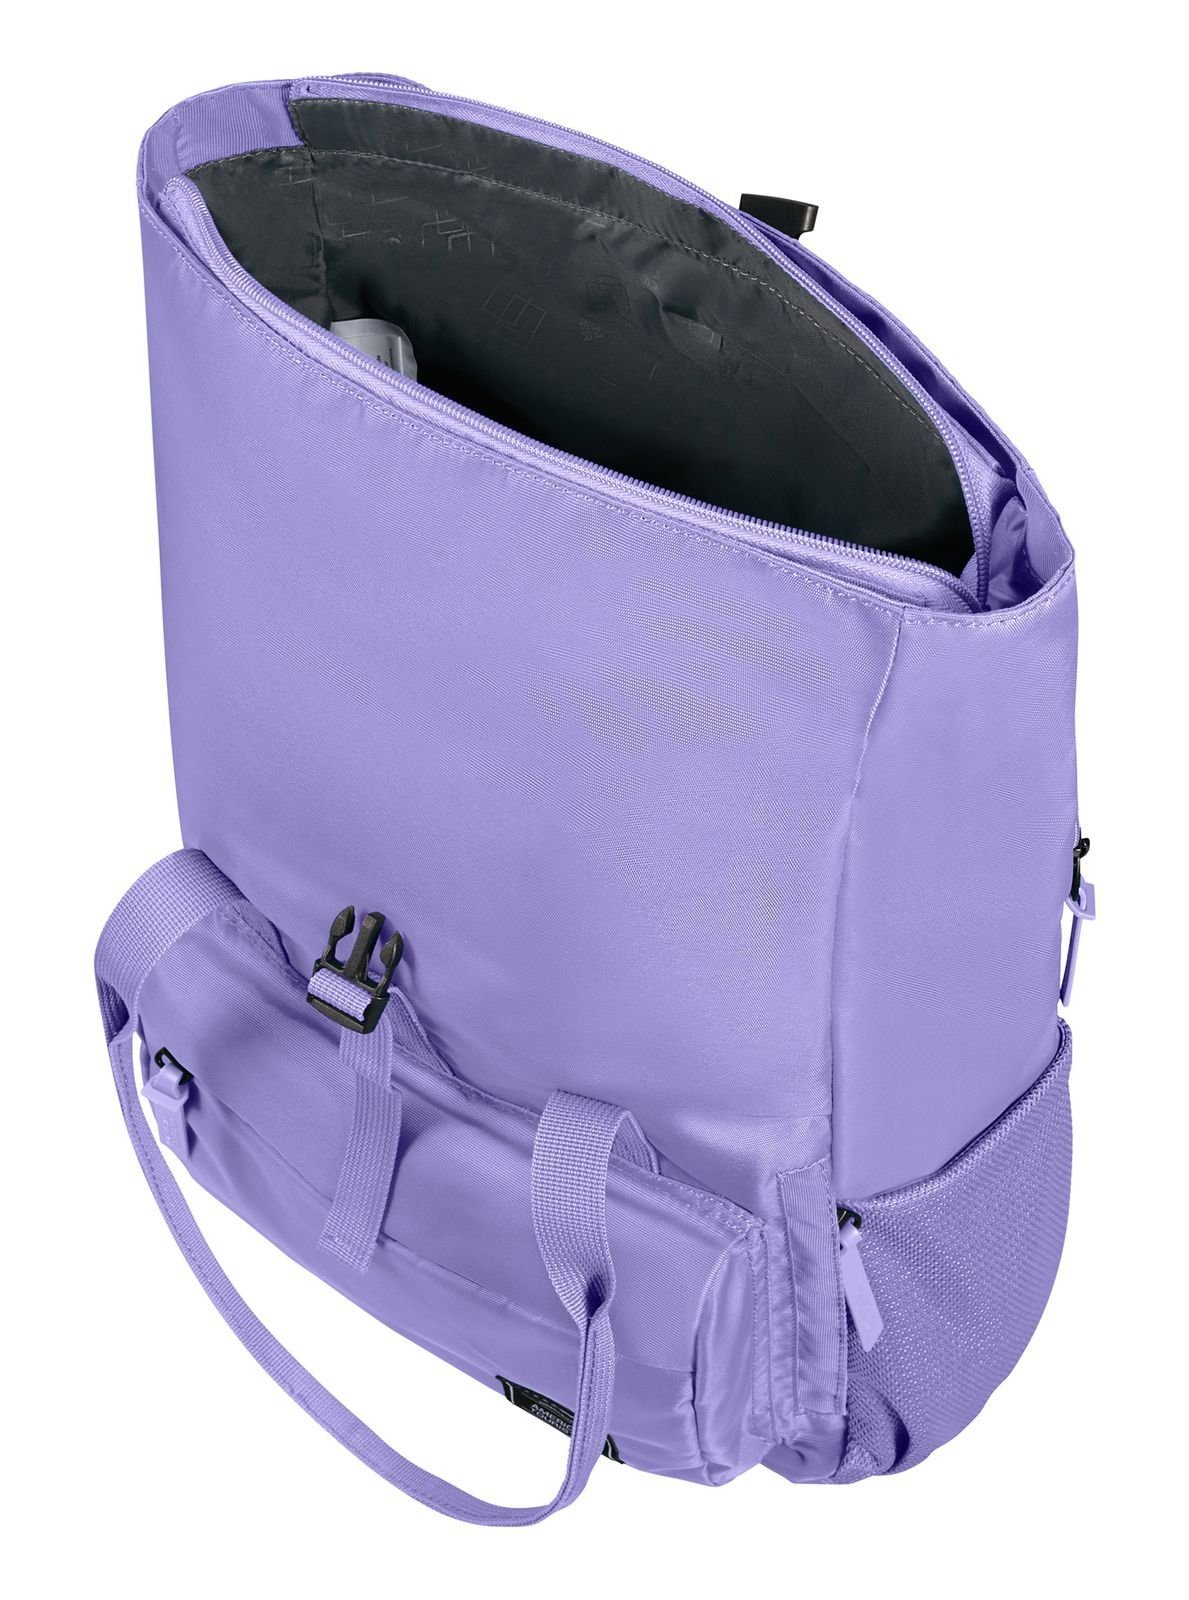 American Tourister® Lilac Soft Groove Urban Rucksack